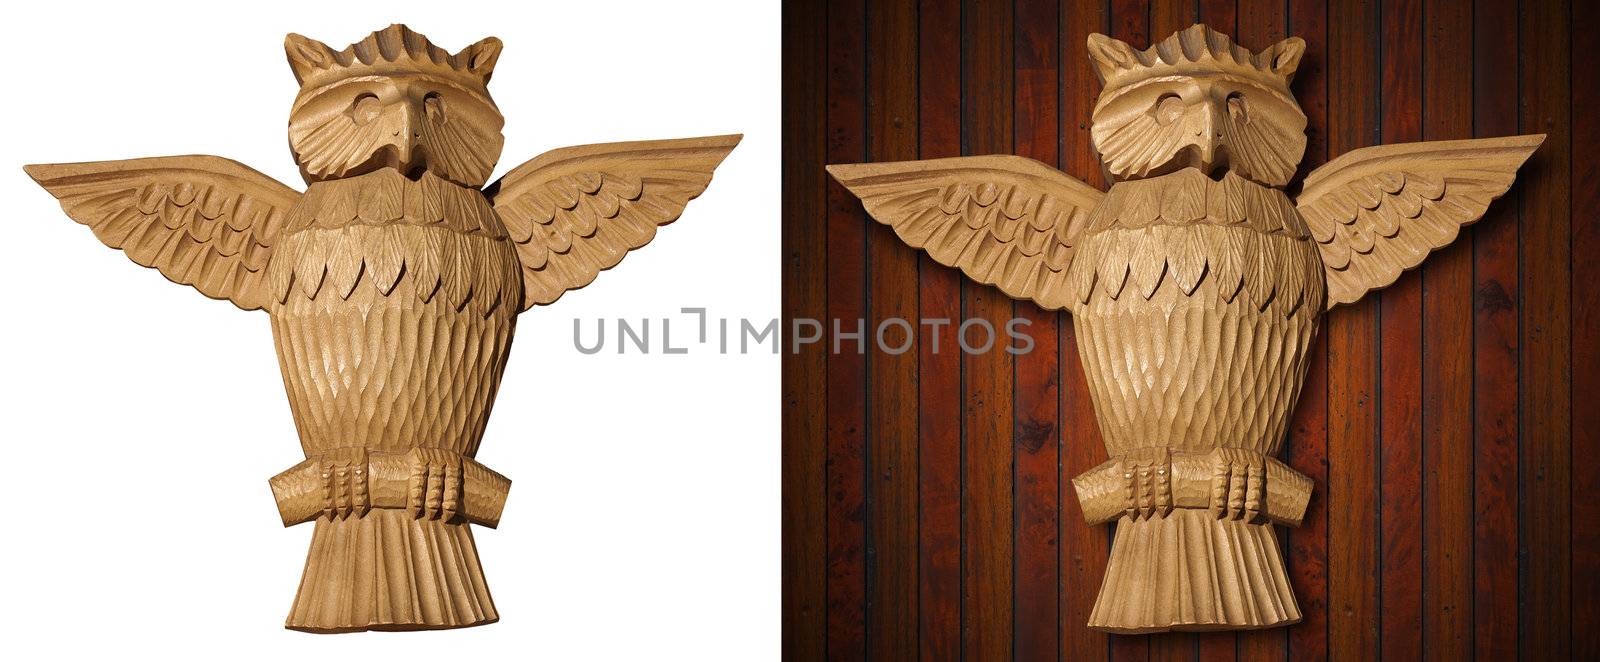 Old wooden carved owl isolated on white and wooden background